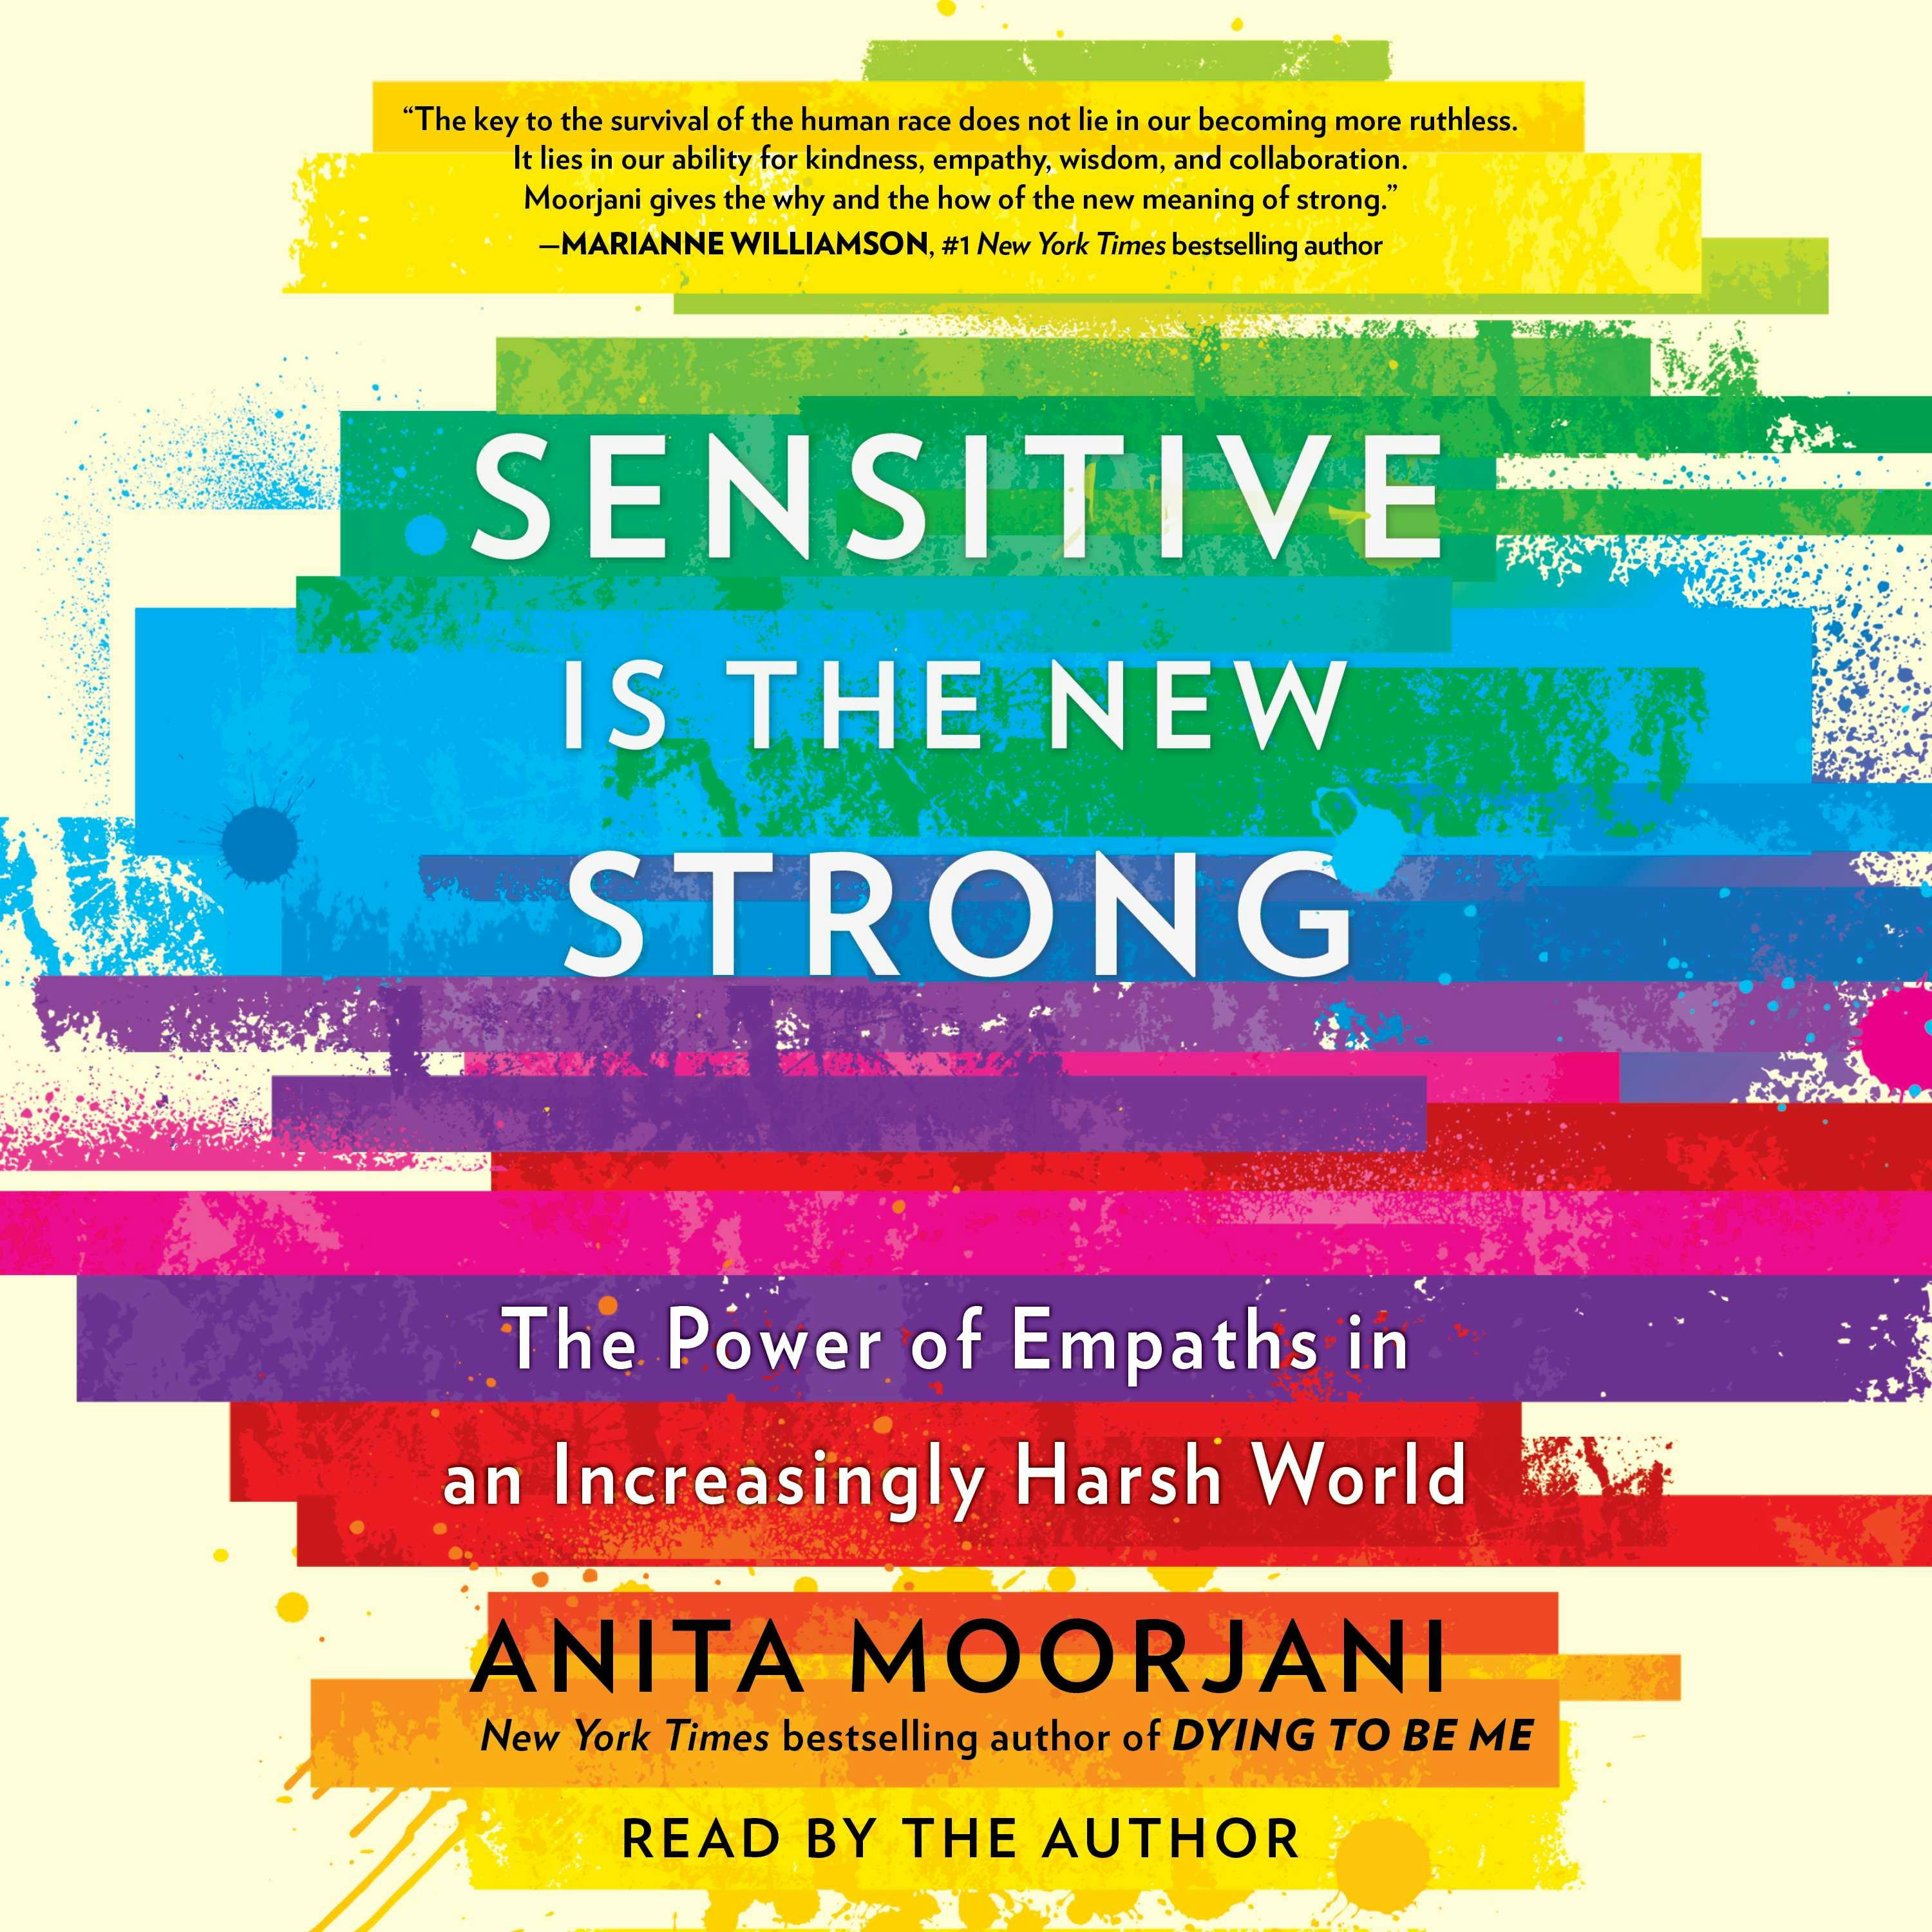 Sensitive Is the New Strong: The Power of Empaths in an Increasingly Harsh World - Anita Moorjani